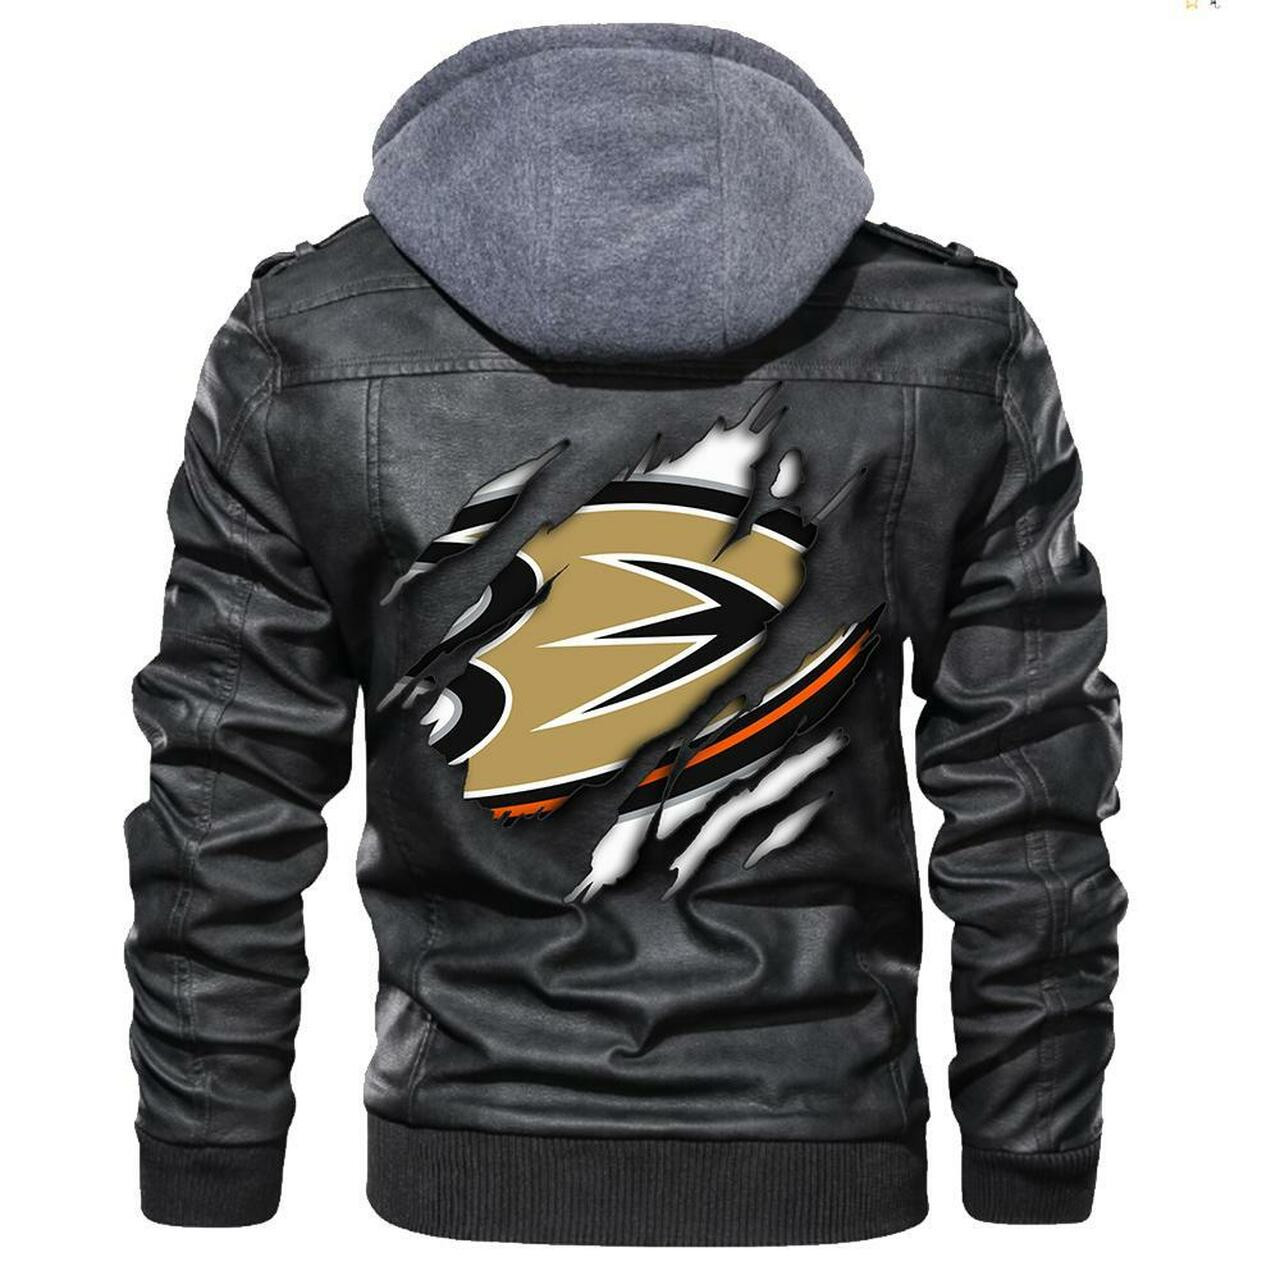 Top leather jacket can keep you warm on cooler days 243